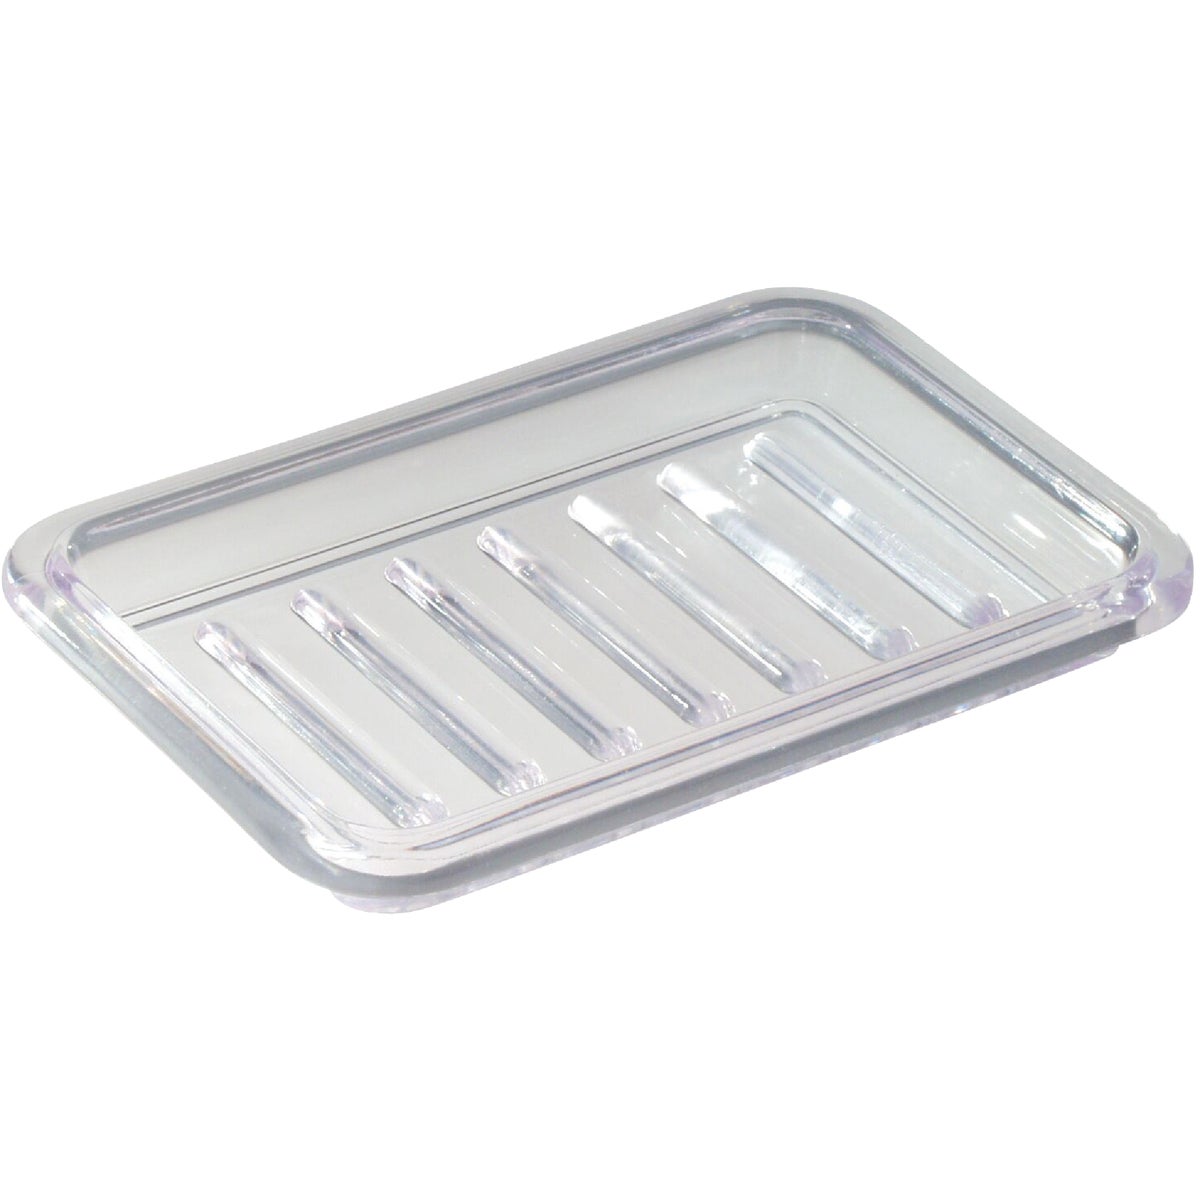 Item 605927, The iDesign Royal Soap Savers are your solution to keeping soap bars clean 